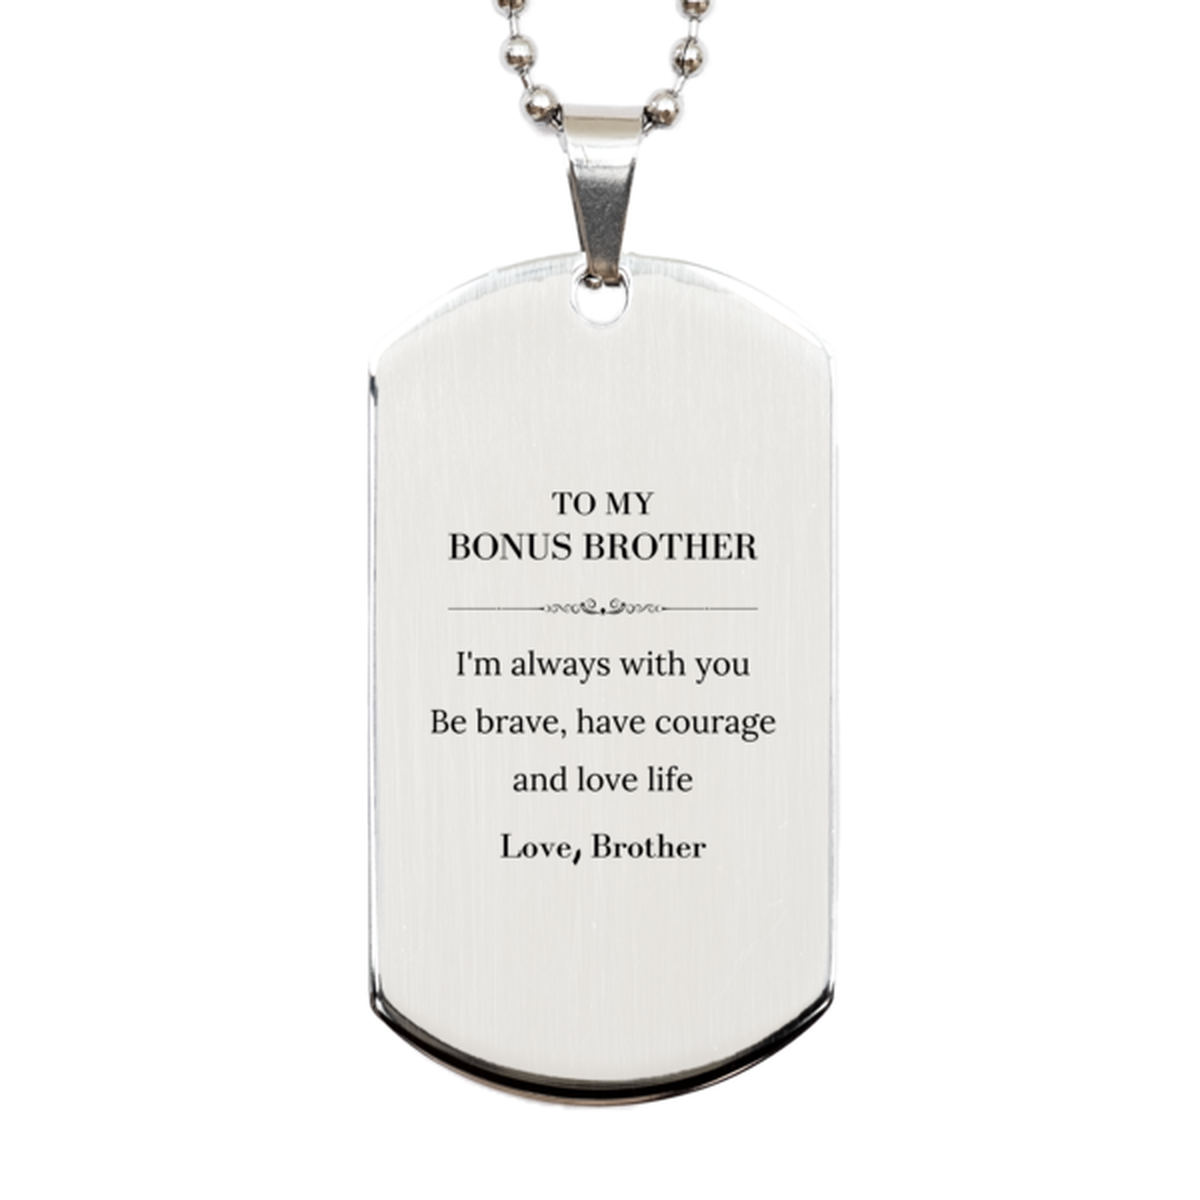 To My Bonus Brother Gifts from Brother, Unique Silver Dog Tag Inspirational Christmas Birthday Graduation Gifts for Bonus Brother I'm always with you. Be brave, have courage and love life. Love, Brother